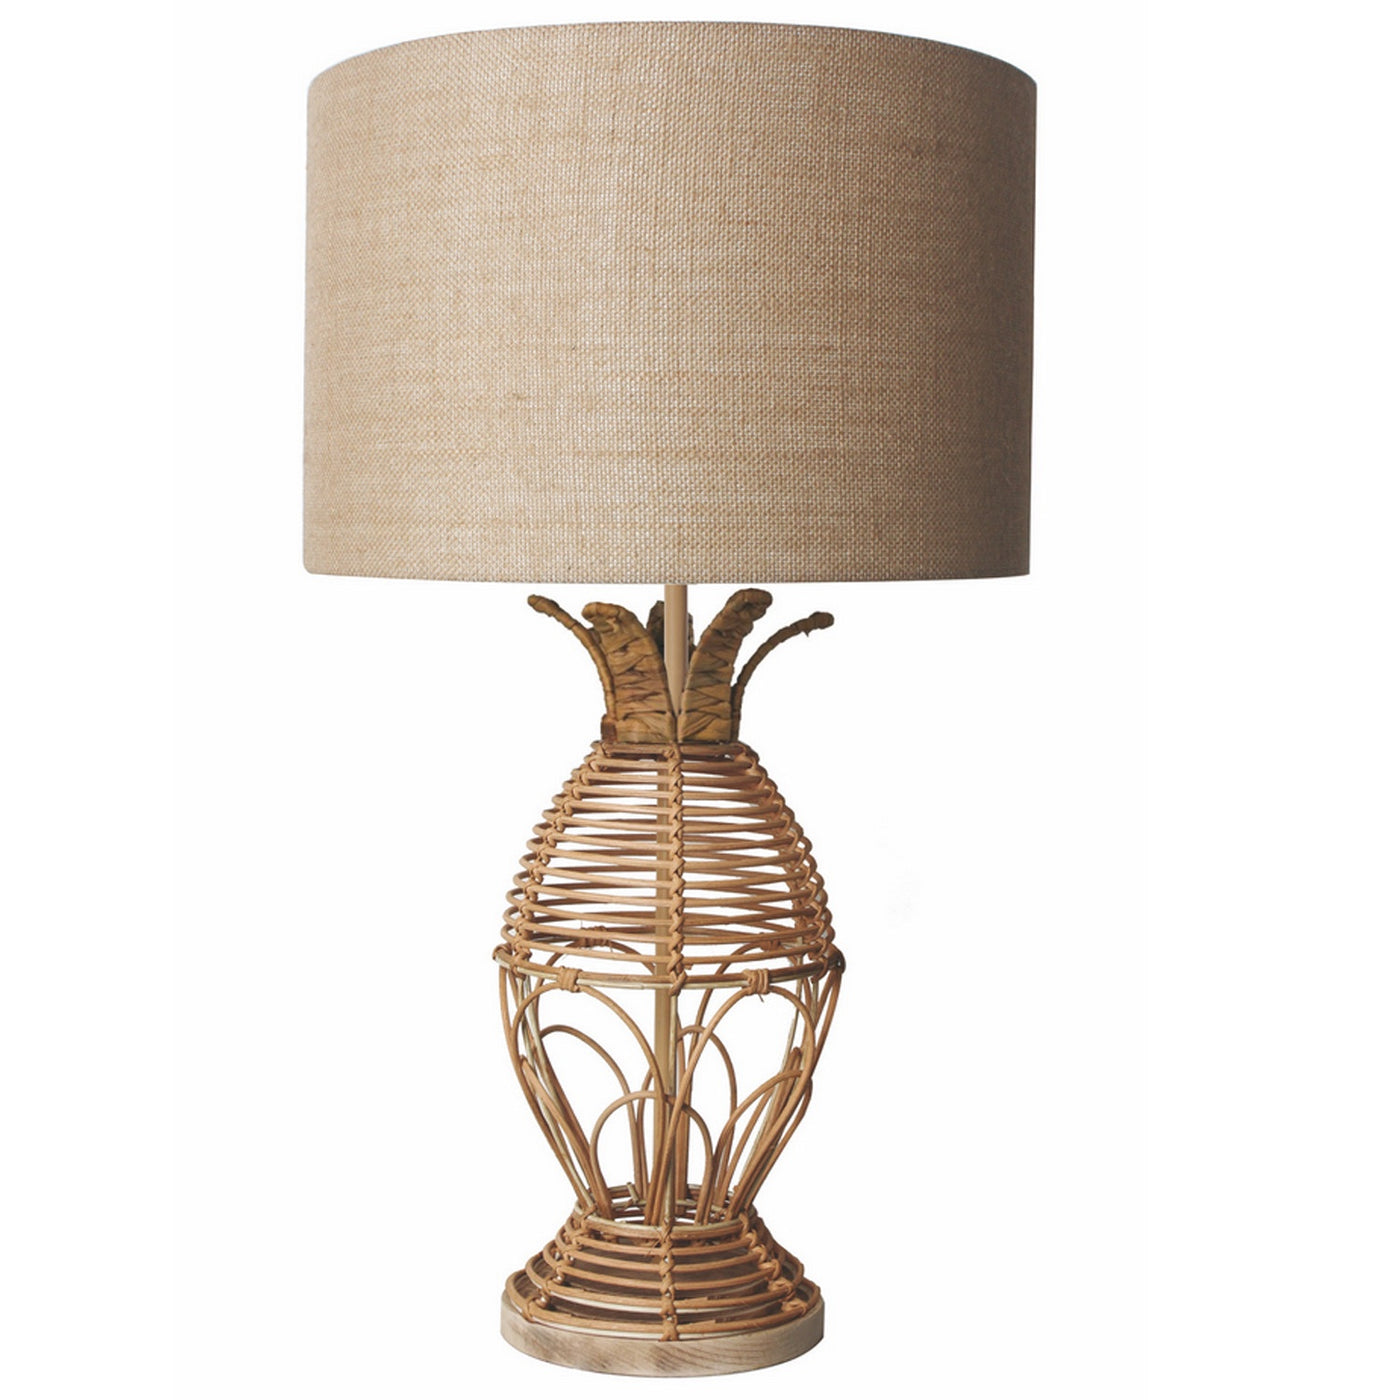 Rattan Pineapple Lamp with Natural Shade